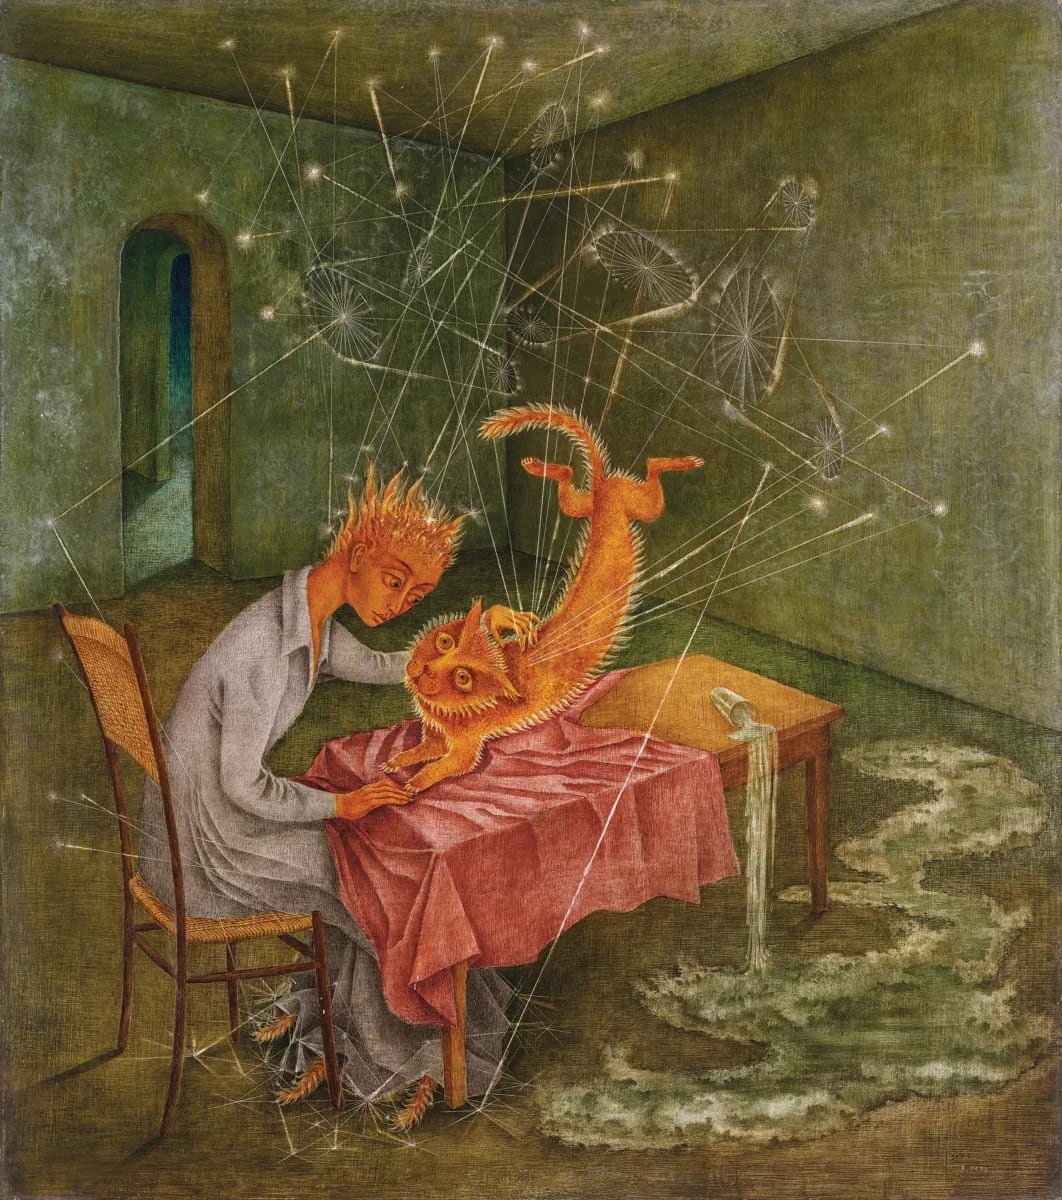 a woman sits at a table with her cat, both of their hair is orange and spiked. a constellation hovers overhead